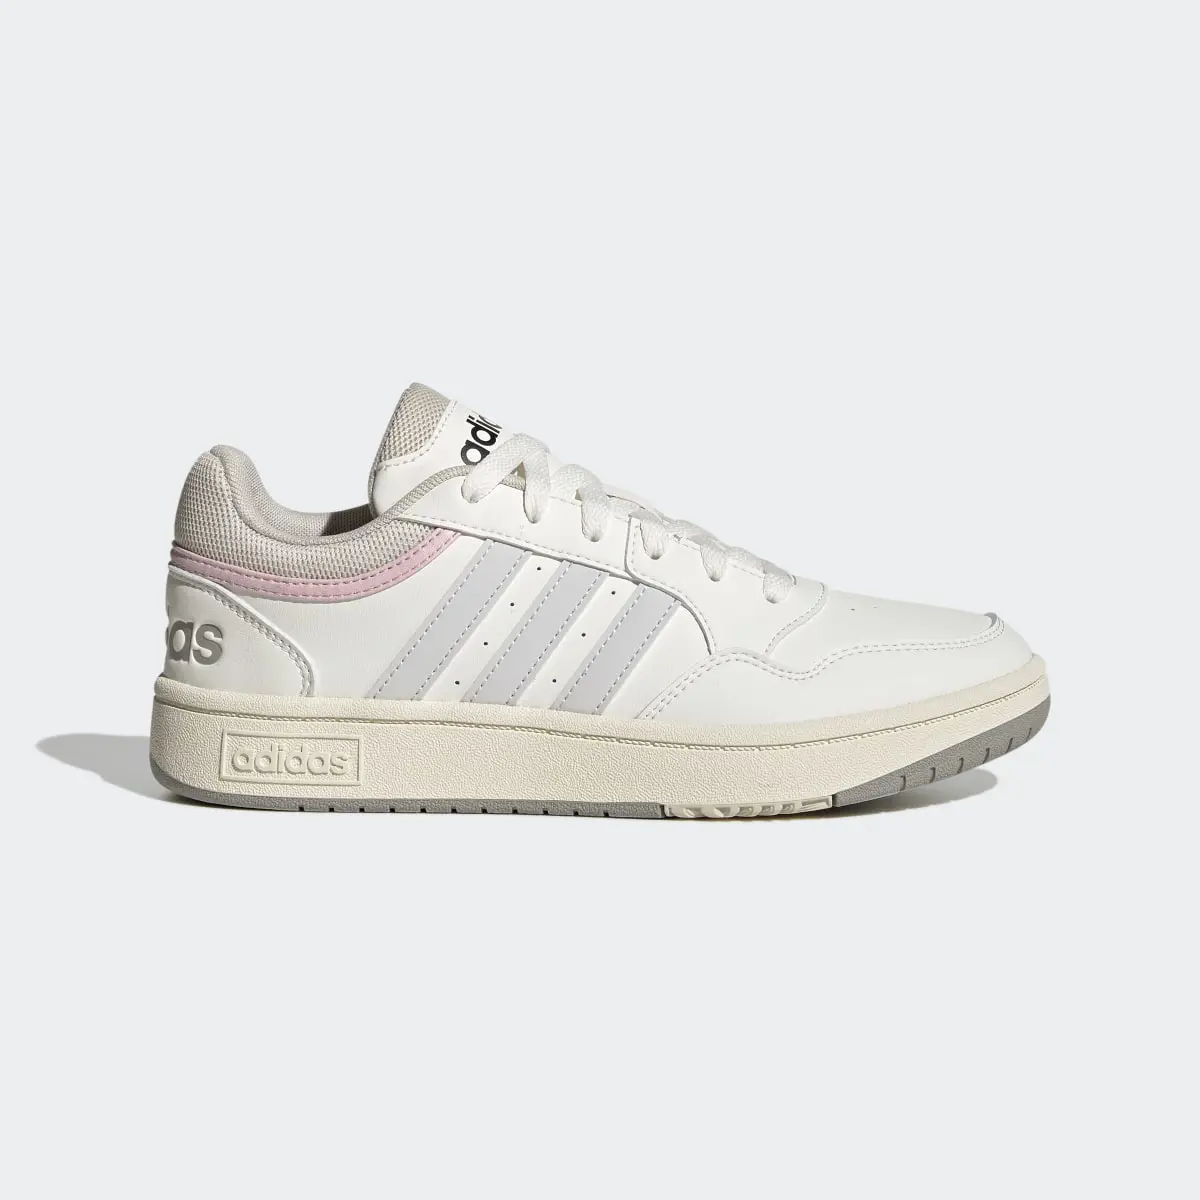 Adidas Hoops 3.0 Mid Lifestyle Basketball Low Schuh. 2